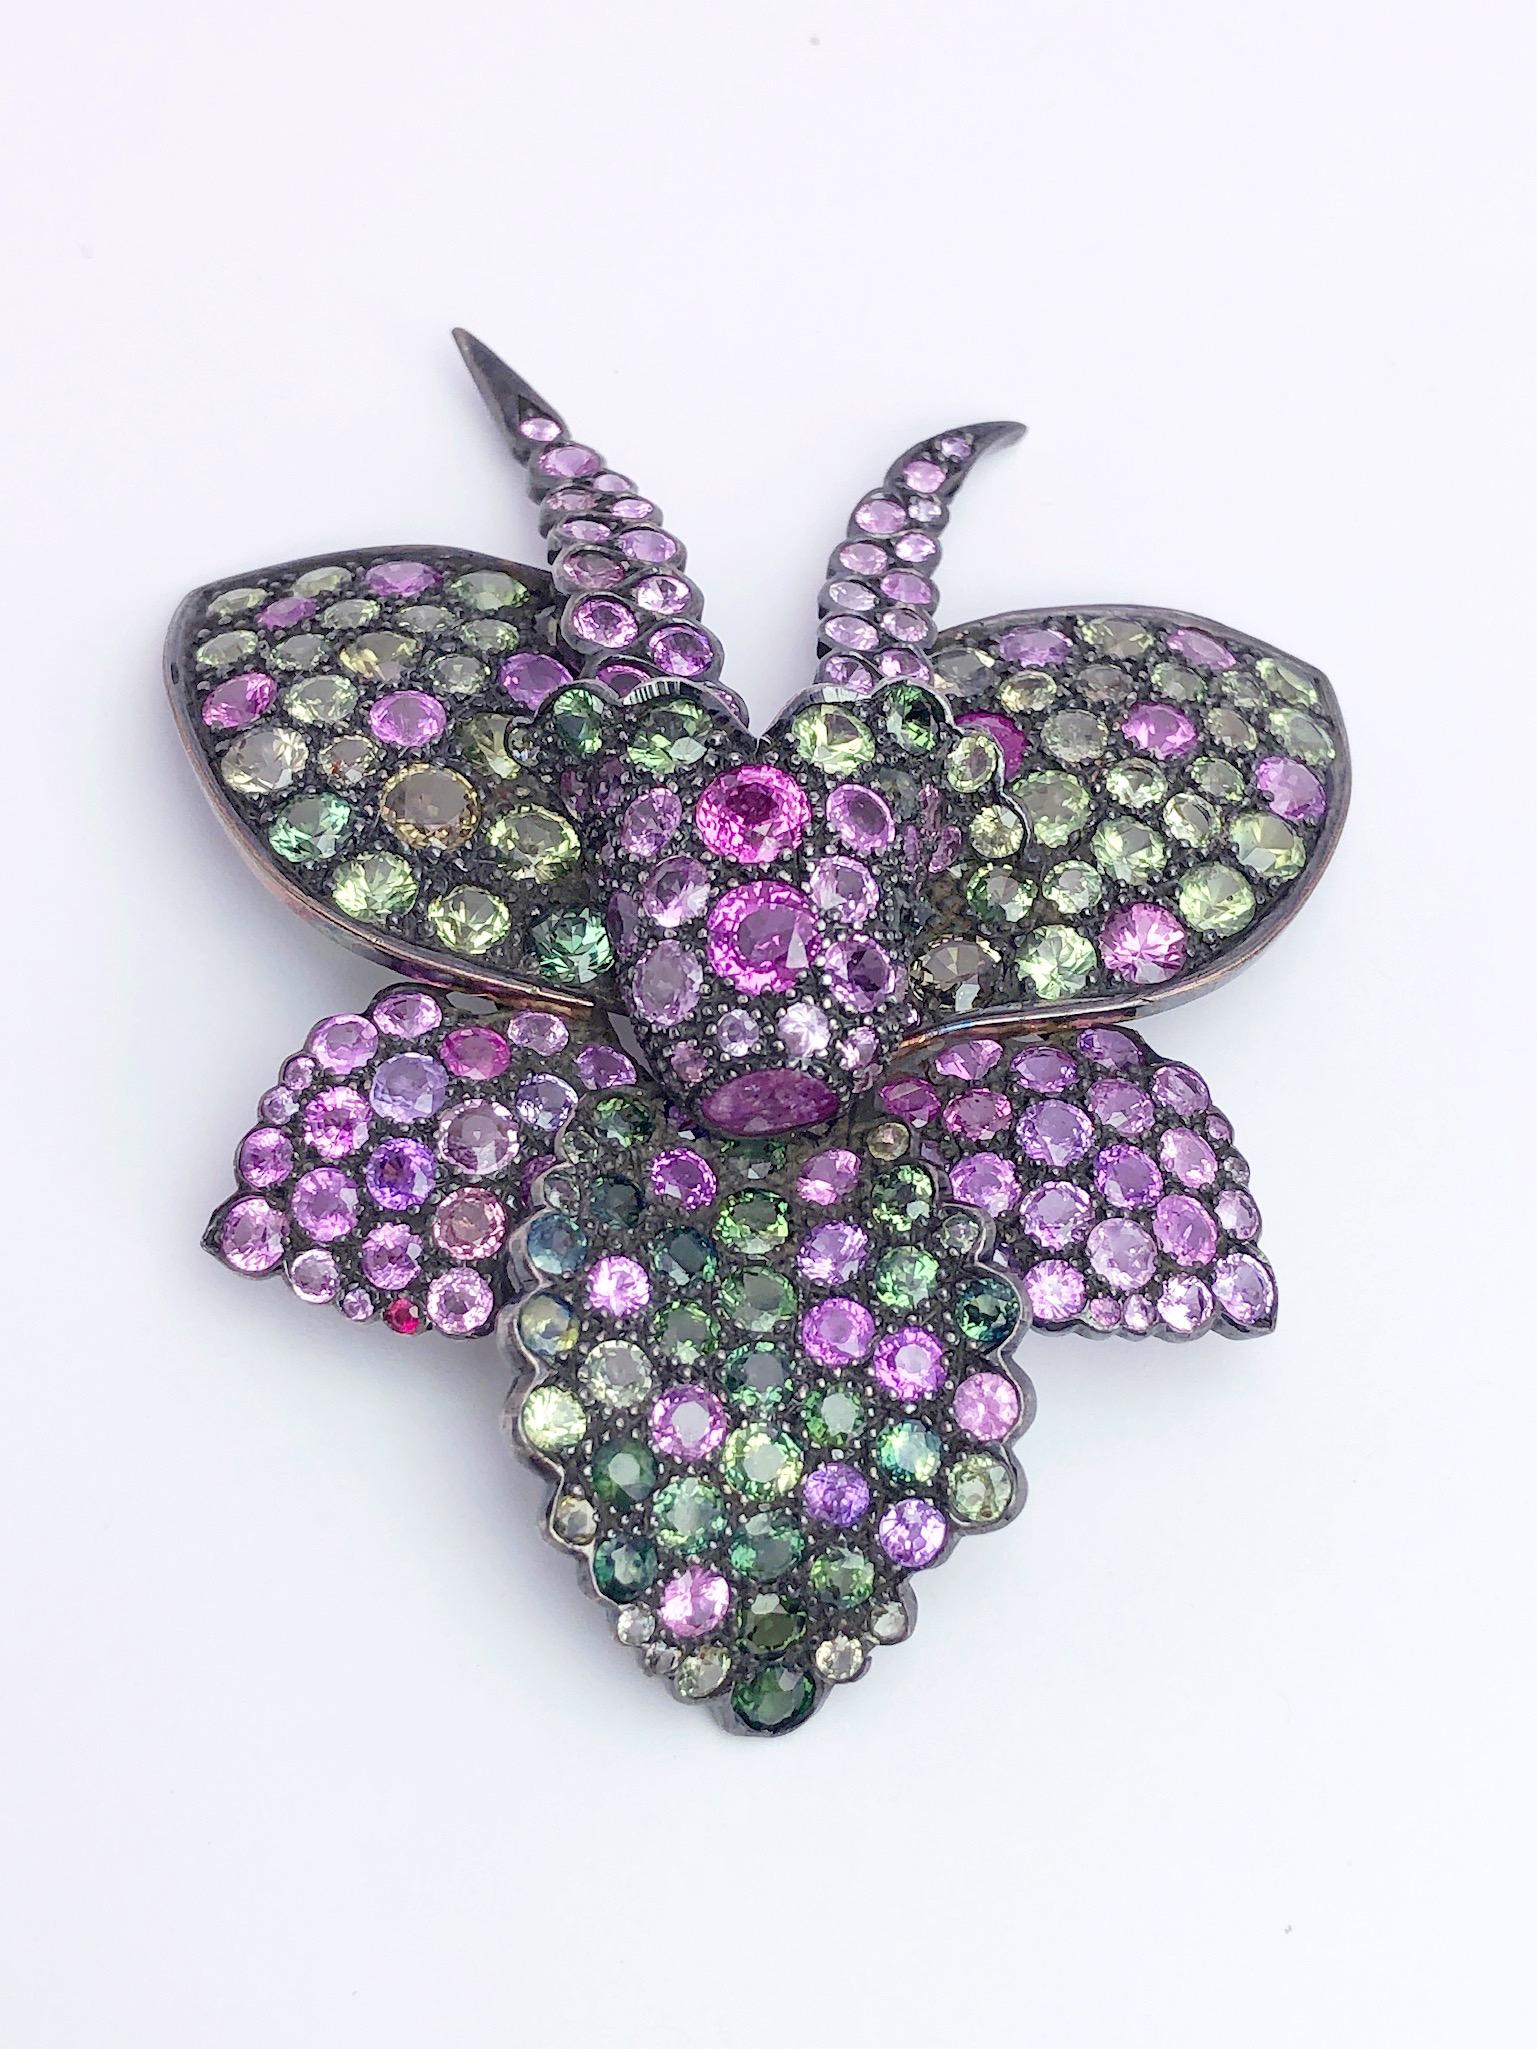 A lovely orchid brooch beautifully set with shades of pink, purple and green sapphires. The combination of prong and bezel settings give depth to the orchid. The brooch measures 3